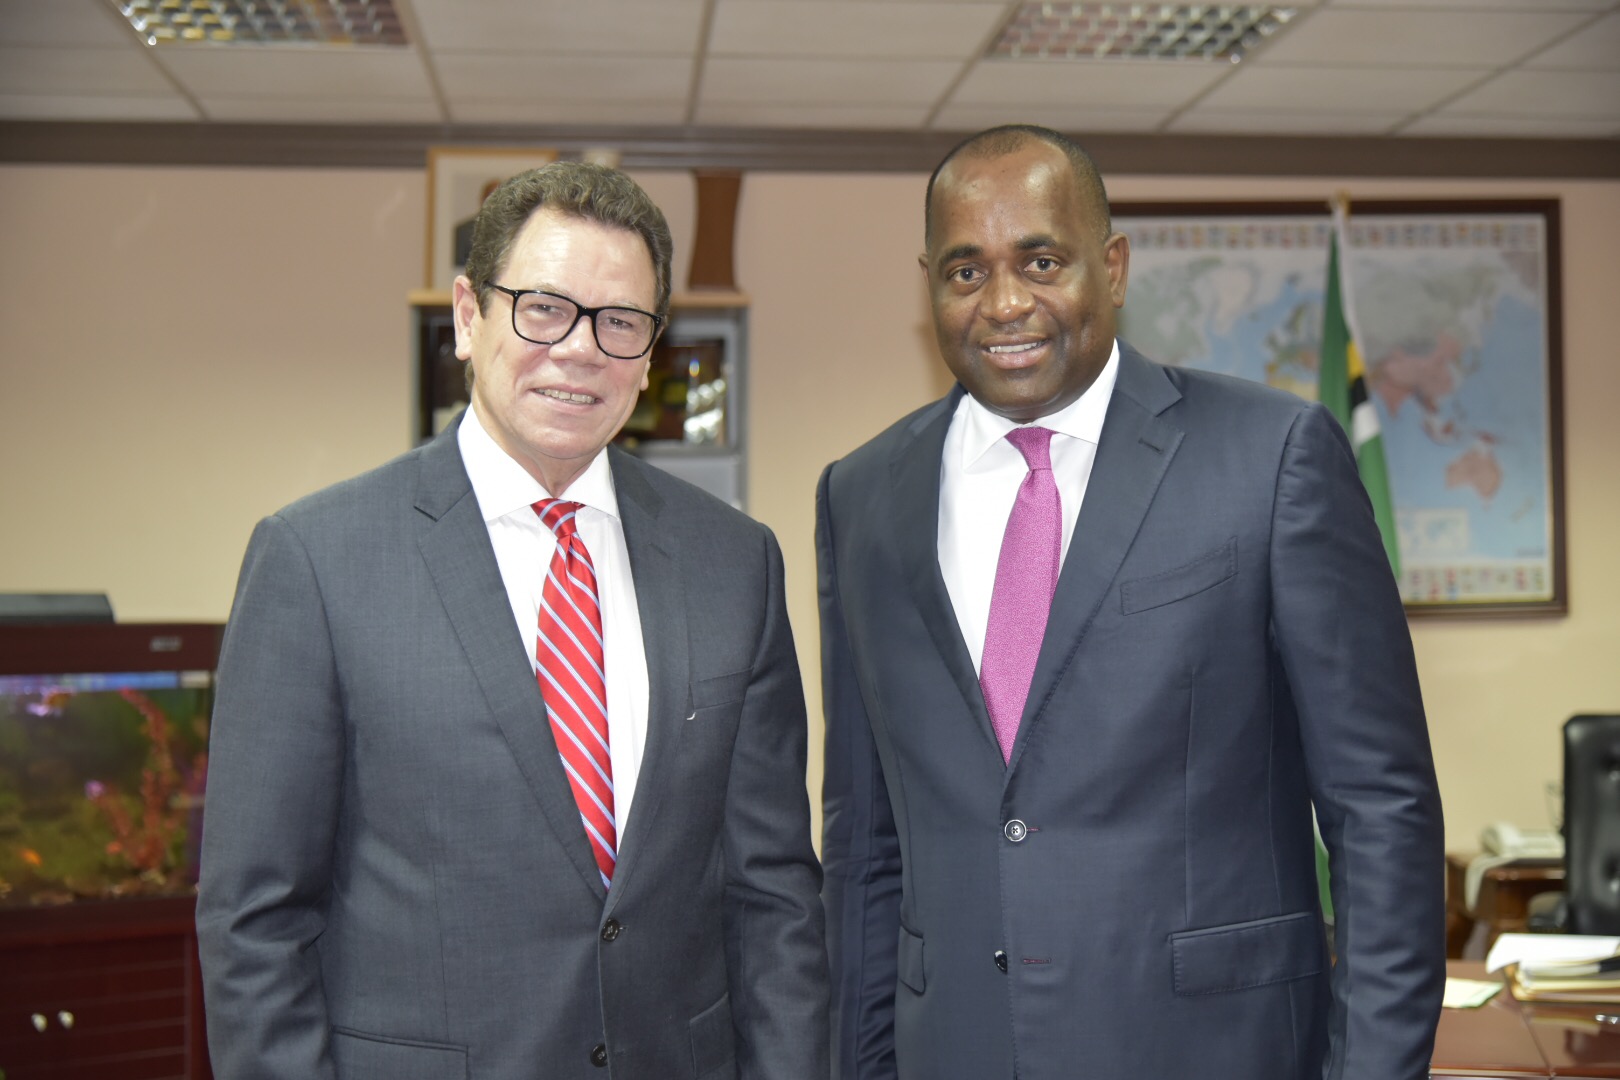 The President of CDB, Dr. Wm. Warren Smith (left) and Prime Minister of Dominica, Hon. Roosevelt Skerrit, during the courtesy call on September 14, 2017.